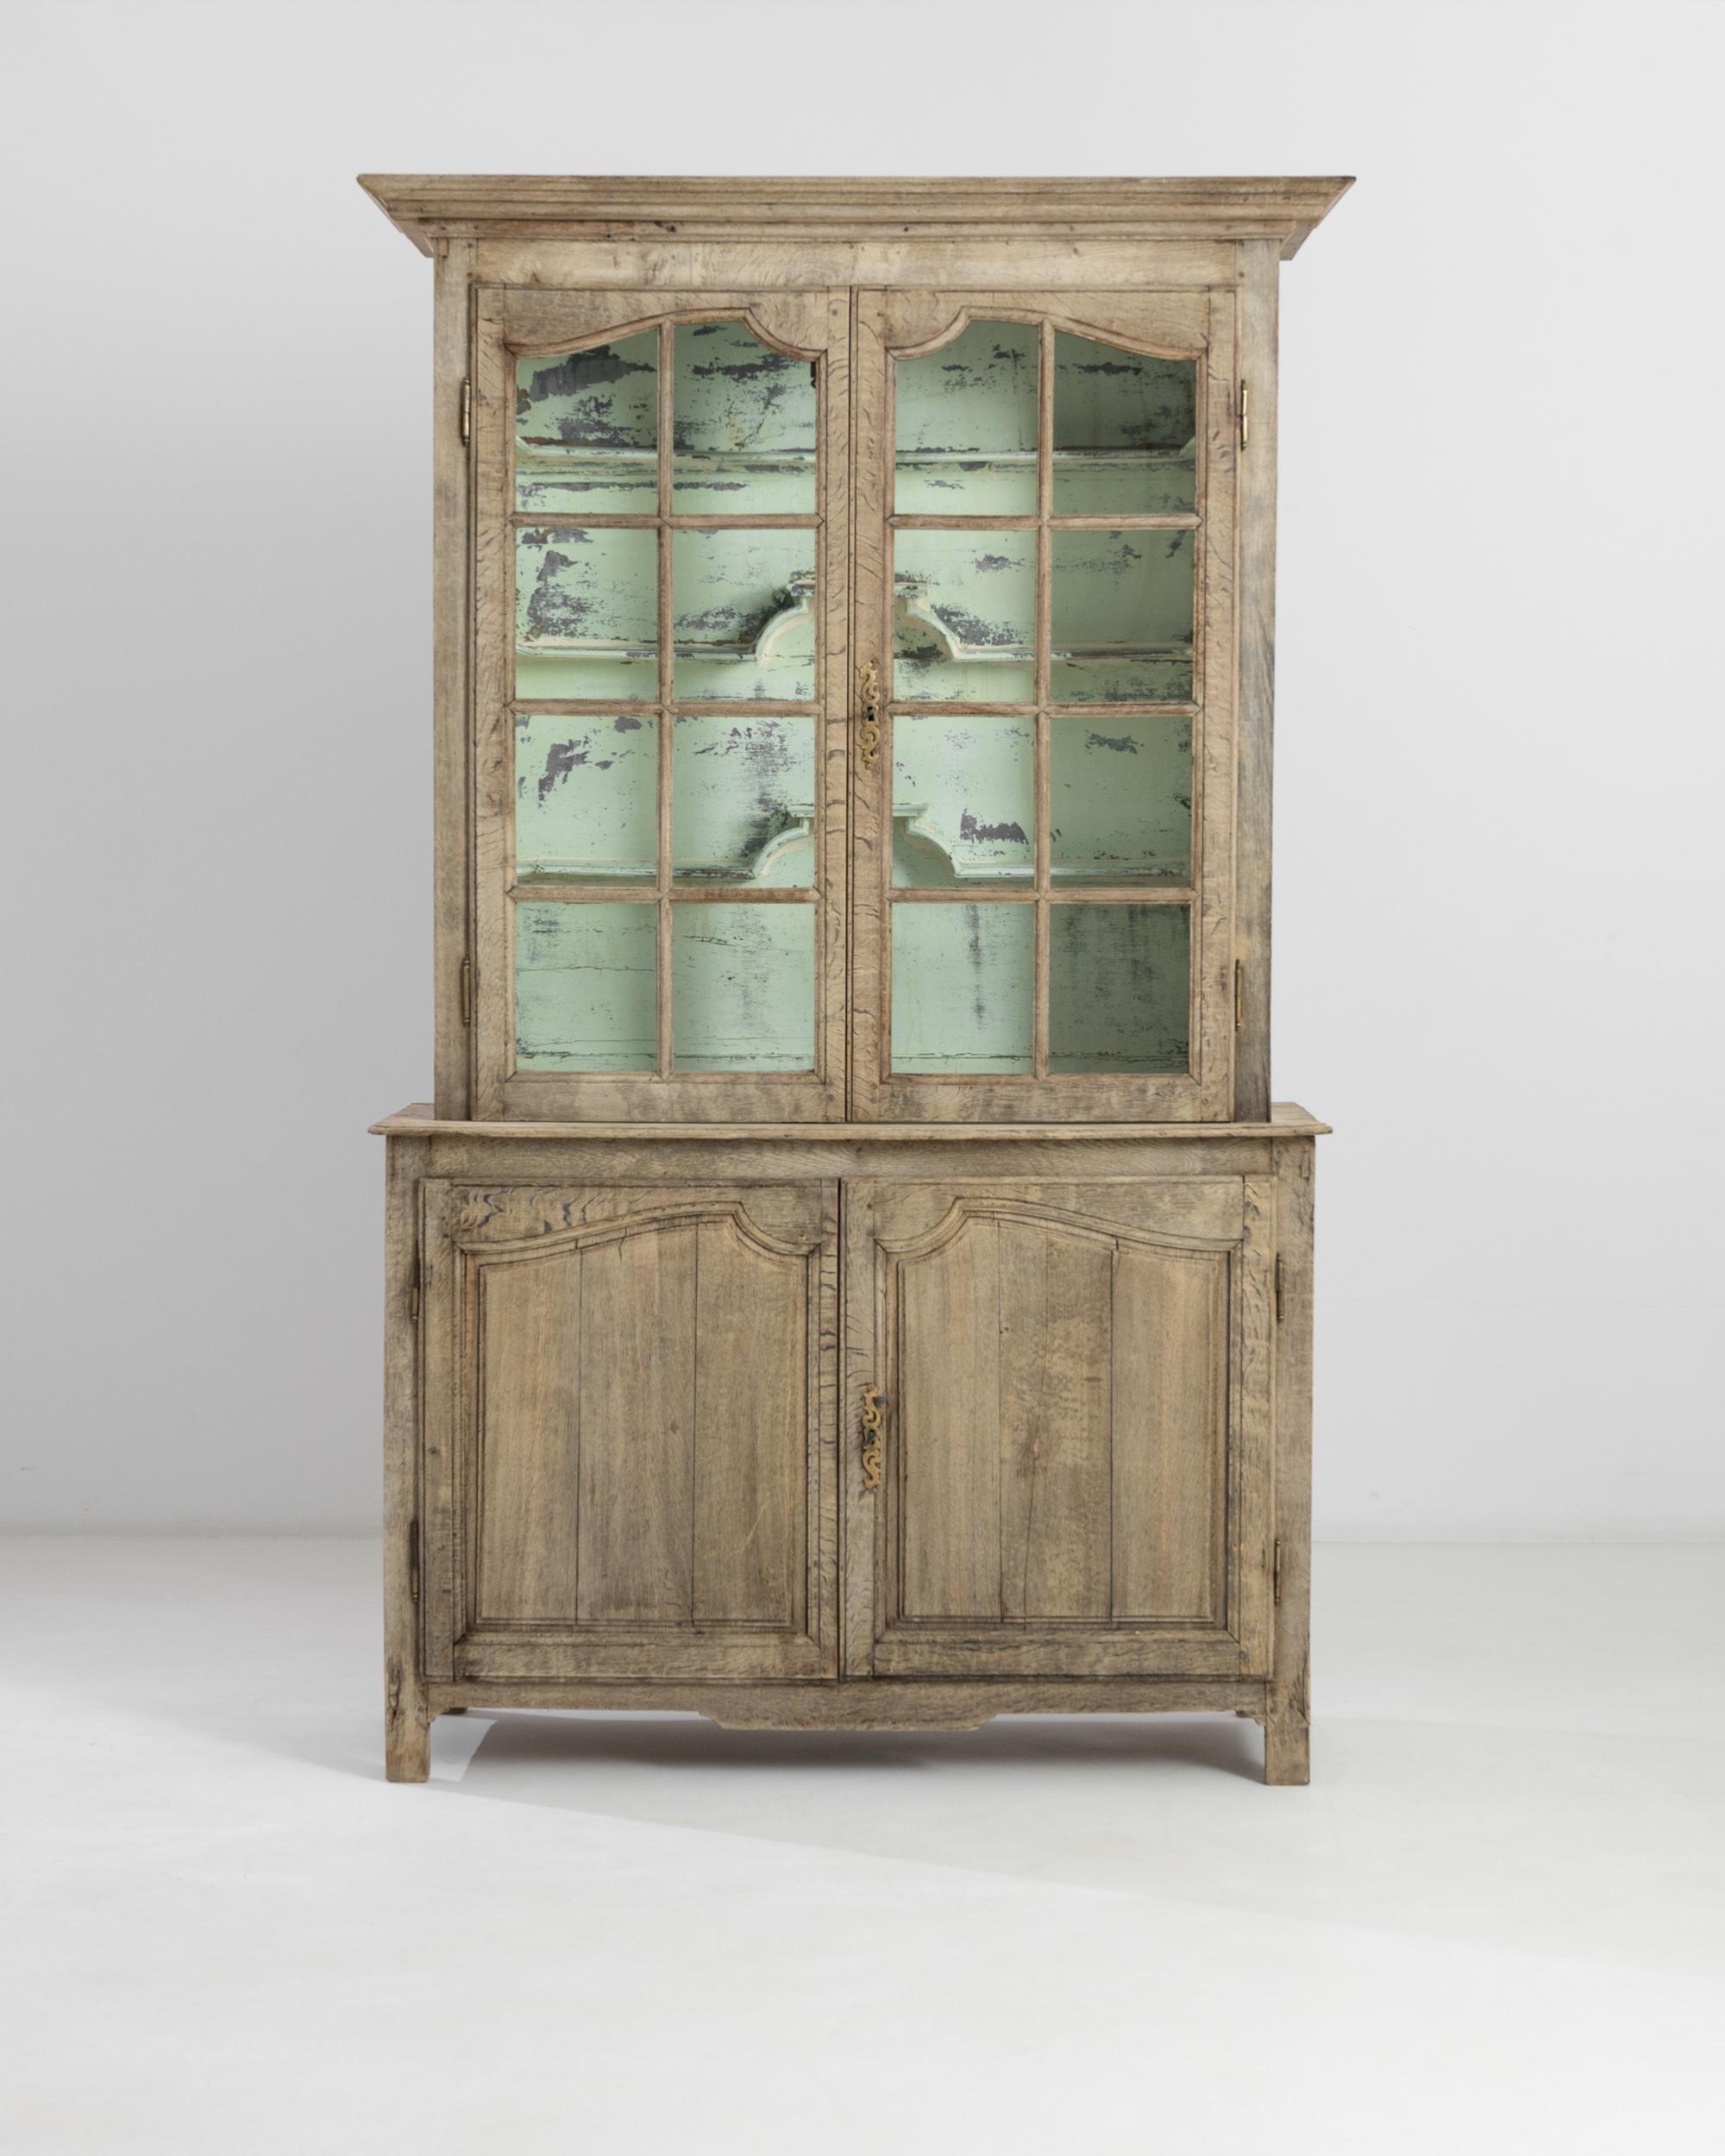 Hand-crafted in 19th century France, this oak vitrine presents a classical ‘deux corps’ anatomy. The glazed doors in the upper section reveal a refreshing light green finish of the interior with three built-in shelves. The lower cupboard with a